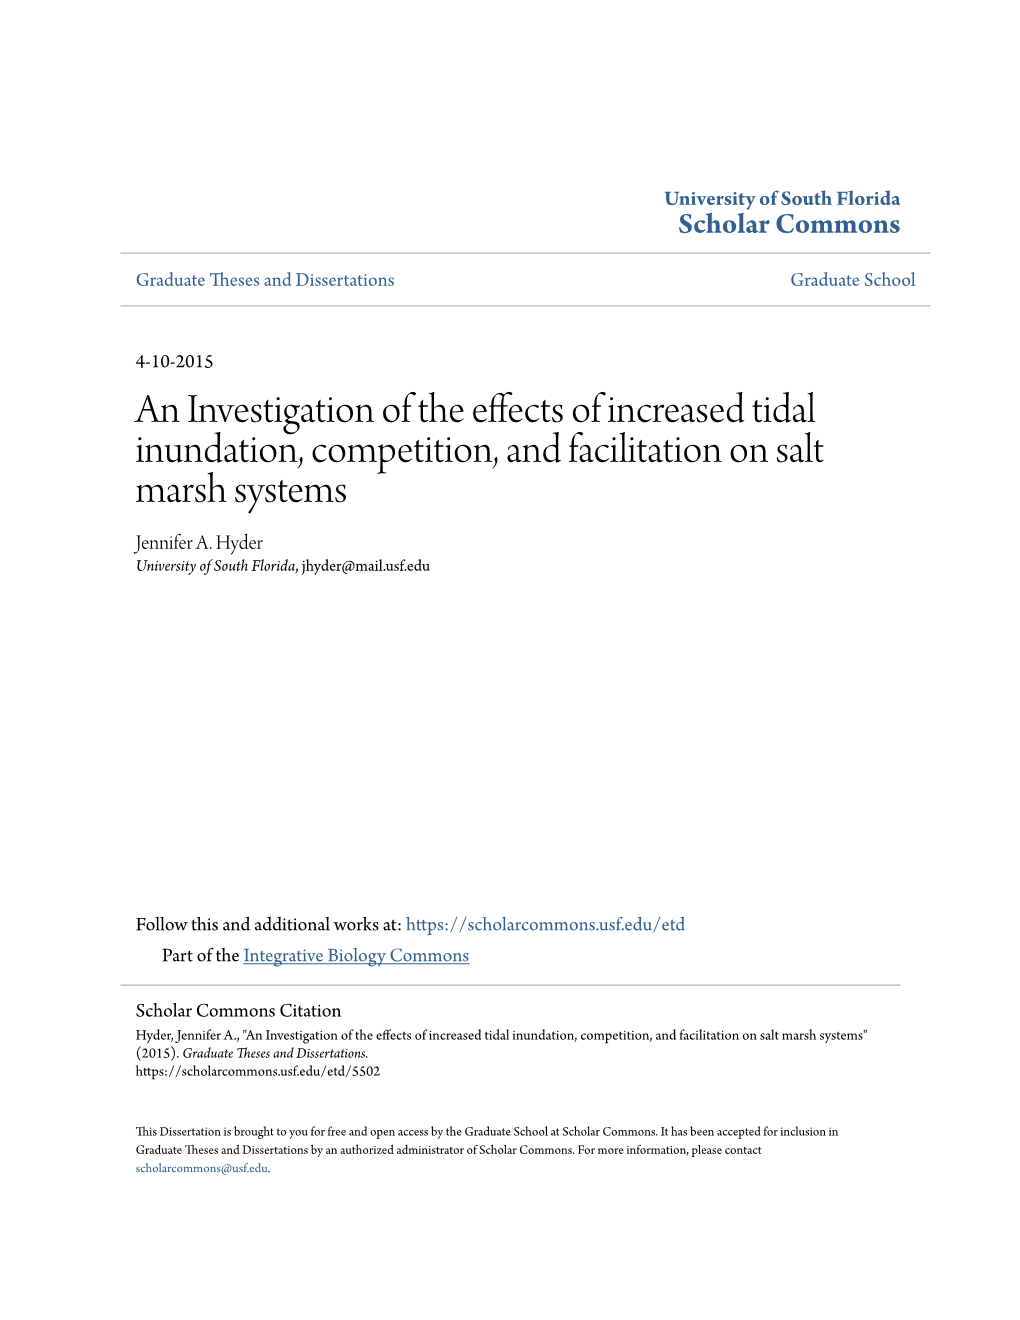 An Investigation of the Effects of Increased Tidal Inundation, Competition, and Facilitation on Salt Marsh Systems Jennifer A